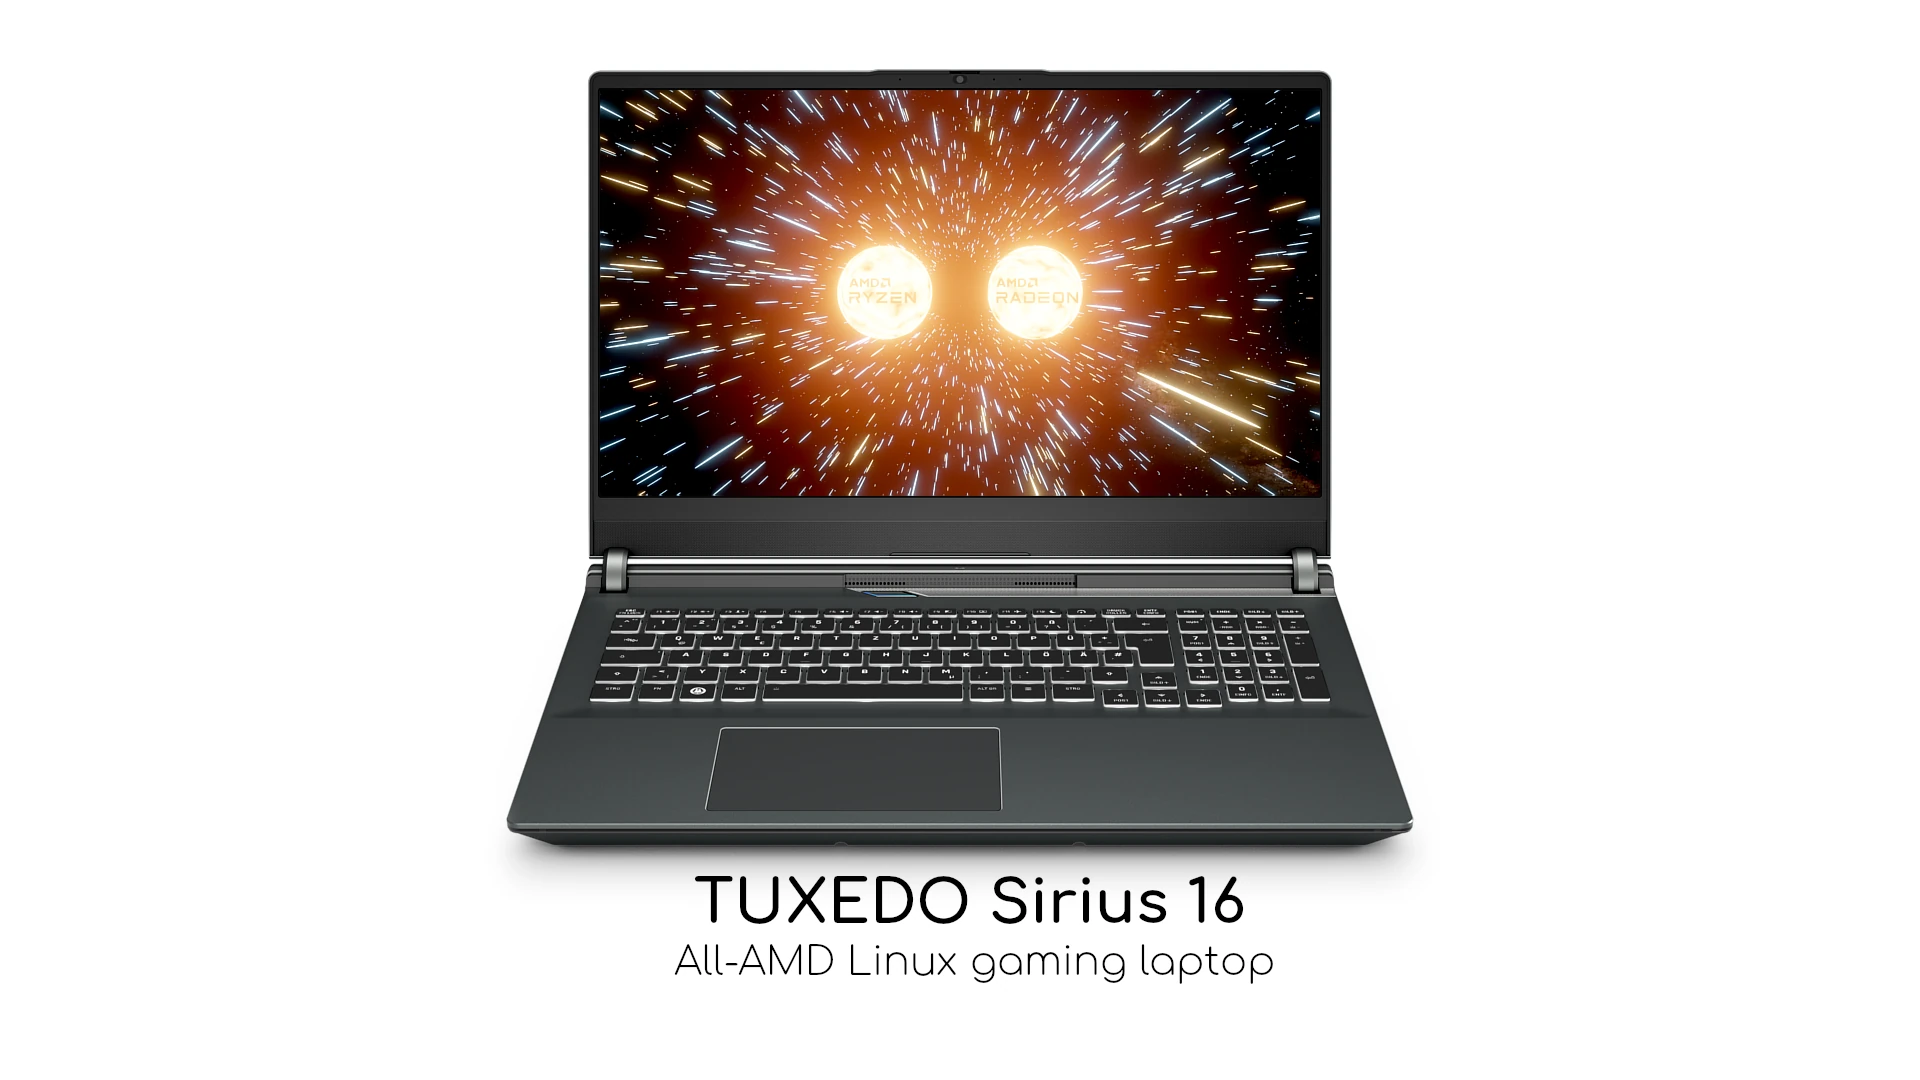 TUXEDO Sirius 16 Unveiled as TUXEDO Computers’ First All-AMD Linux Gaming Laptop